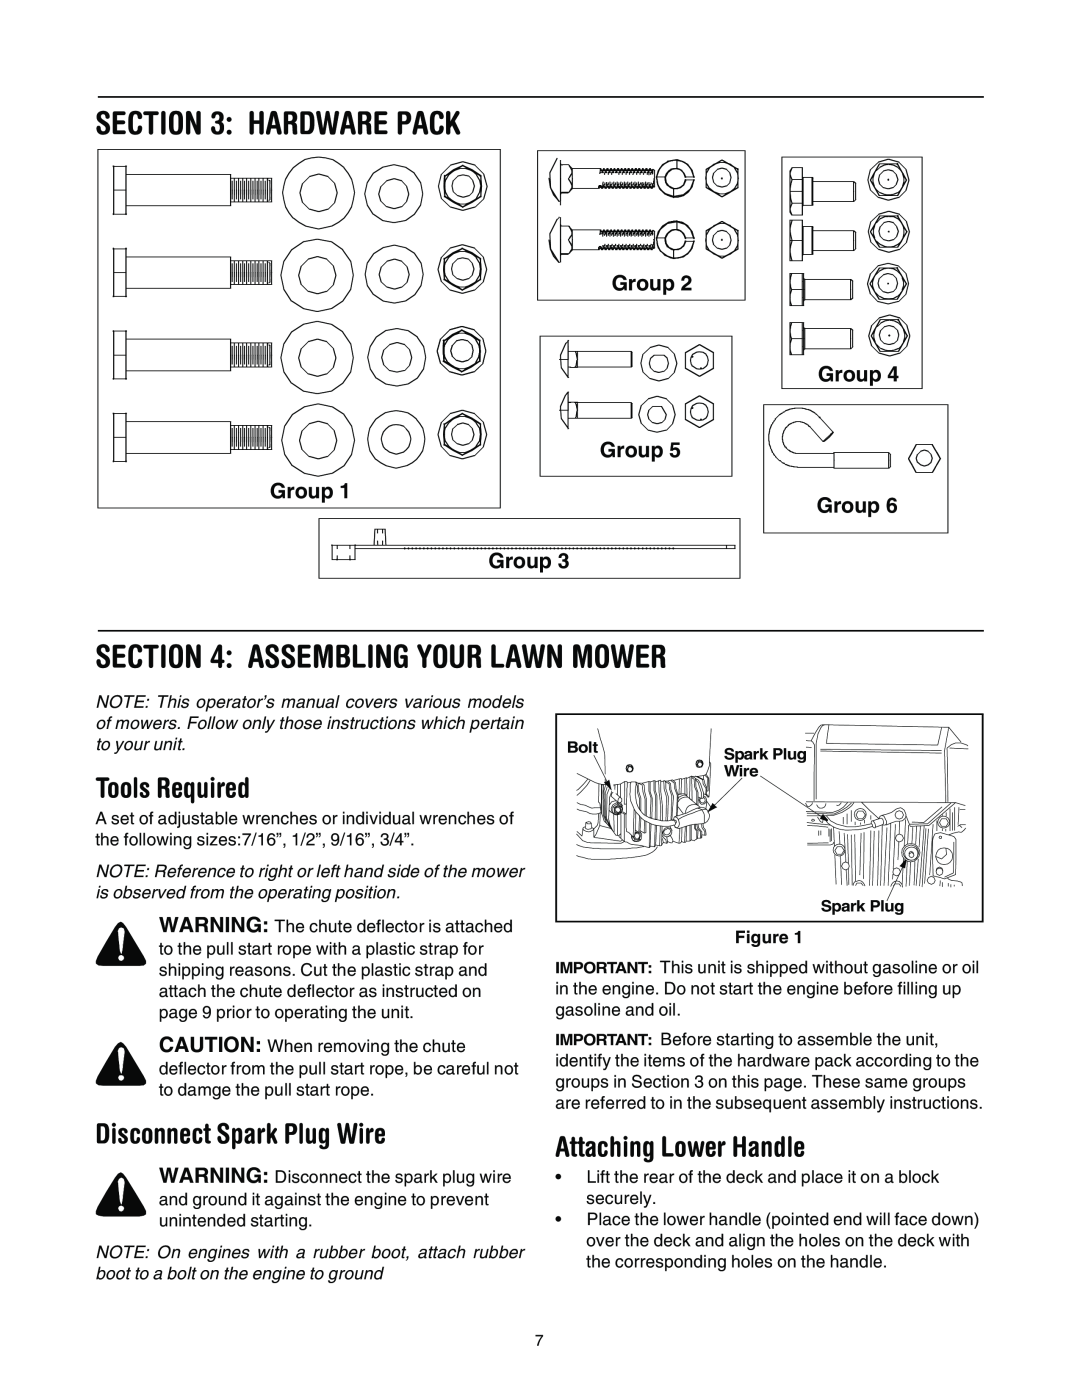 MTD 022, 021 manual Assembling Your Lawn Mower, Tools Required, Disconnect Spark Plug Wire, Attaching Lower Handle, Group 